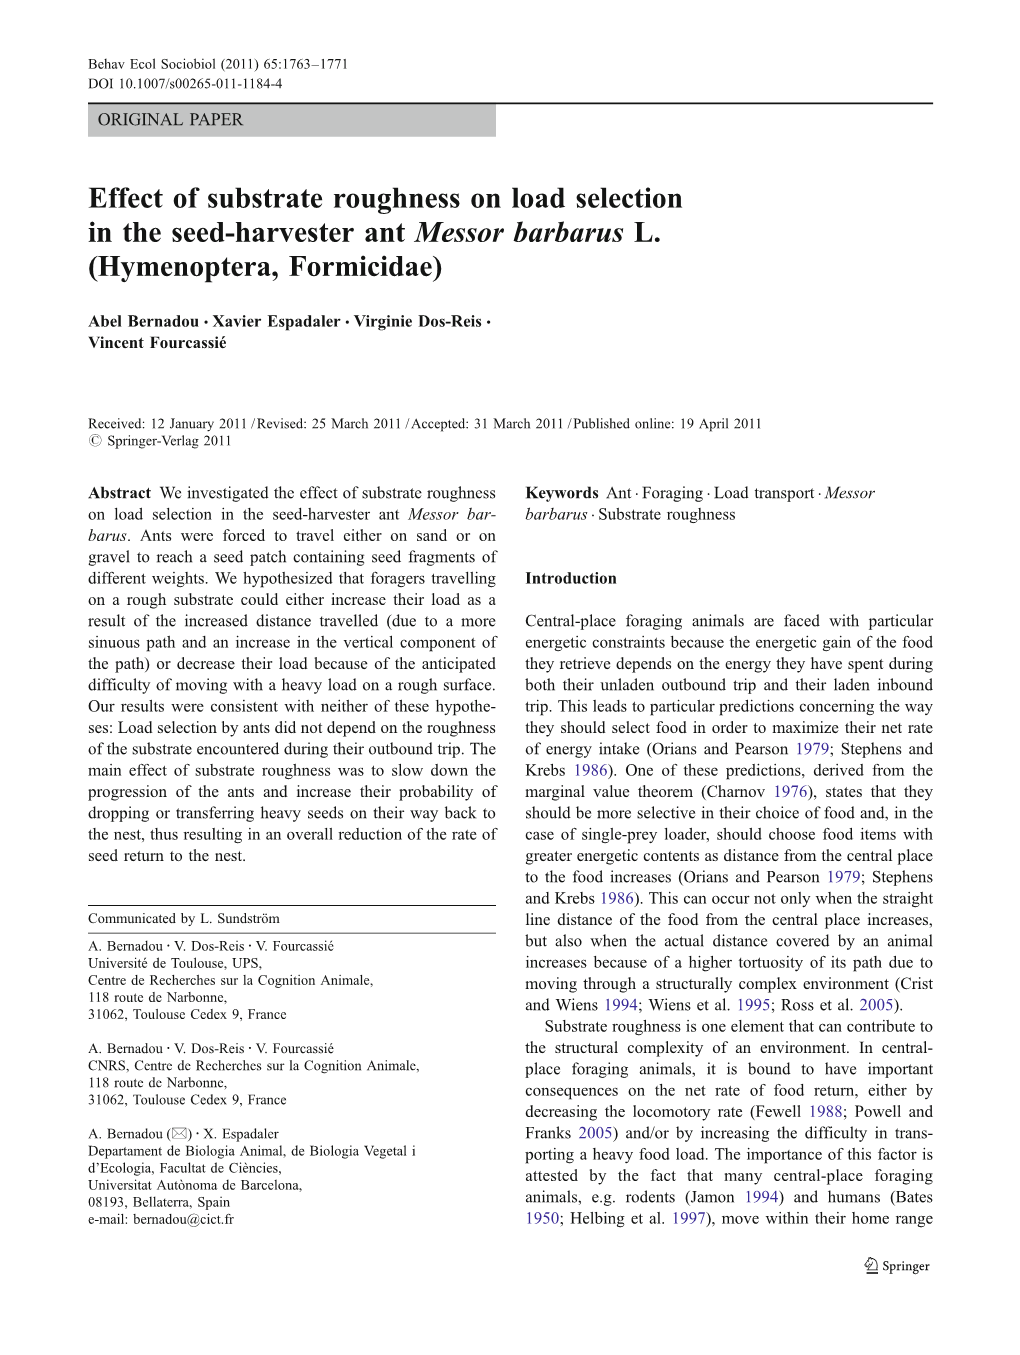 Effect of Substrate Roughness on Load Selection in the Seed-Harvester Ant Messor Barbarus L